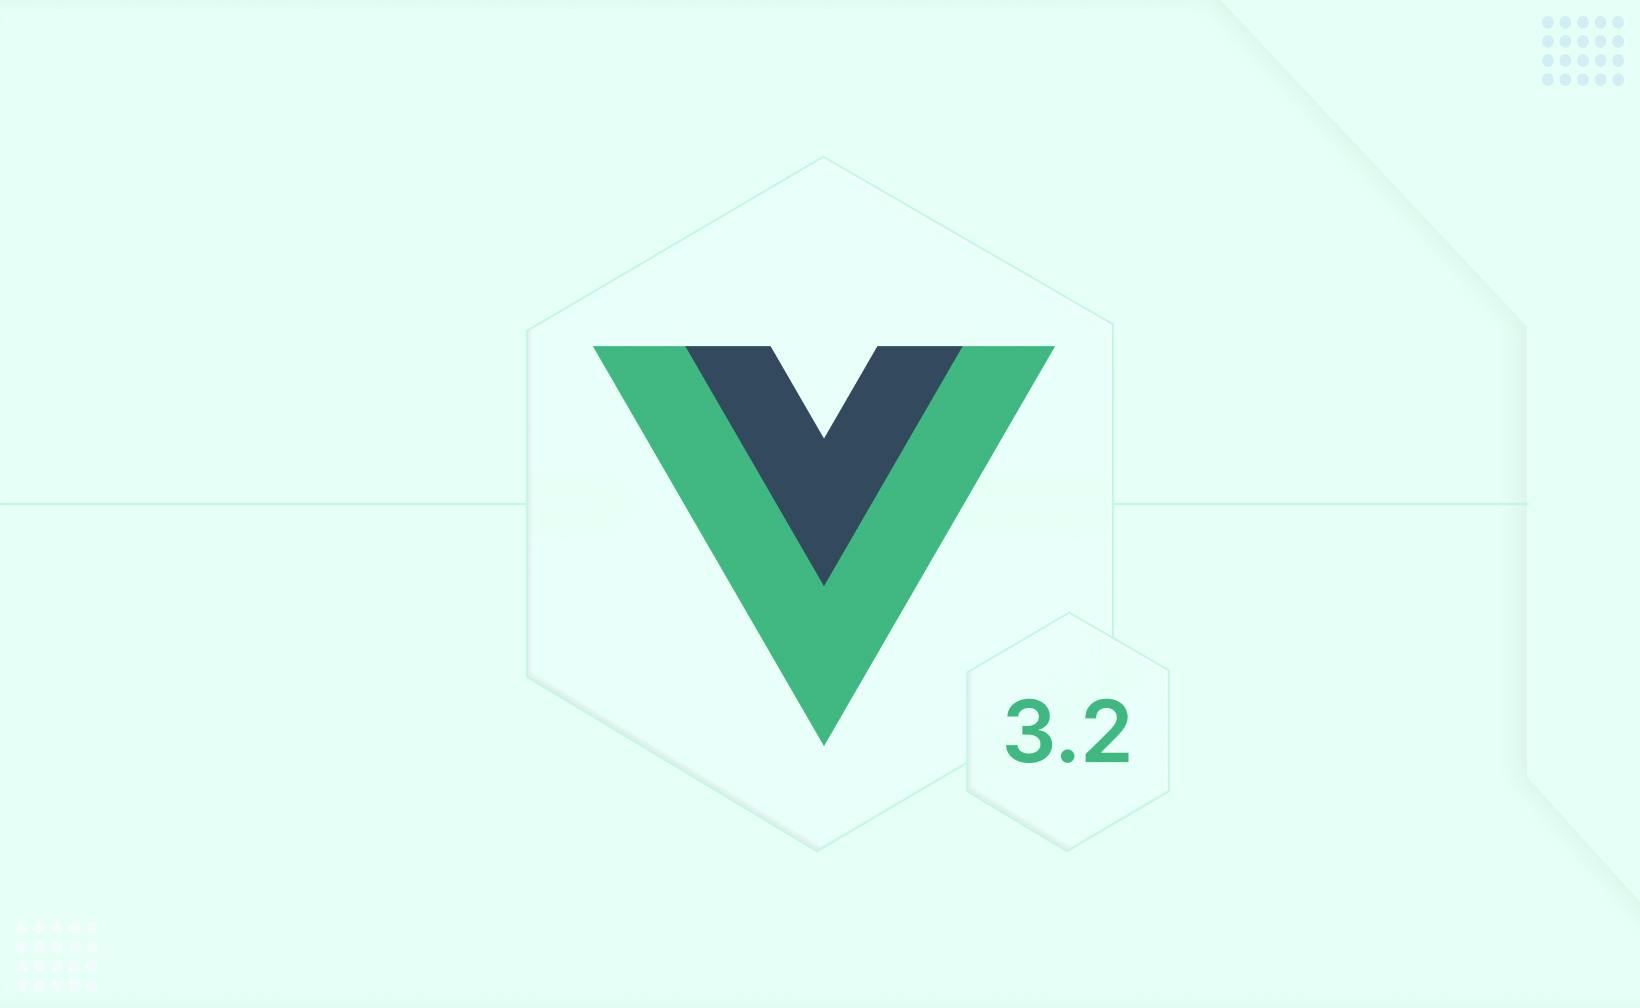 Everything you need to know about Vuejs V 3.2